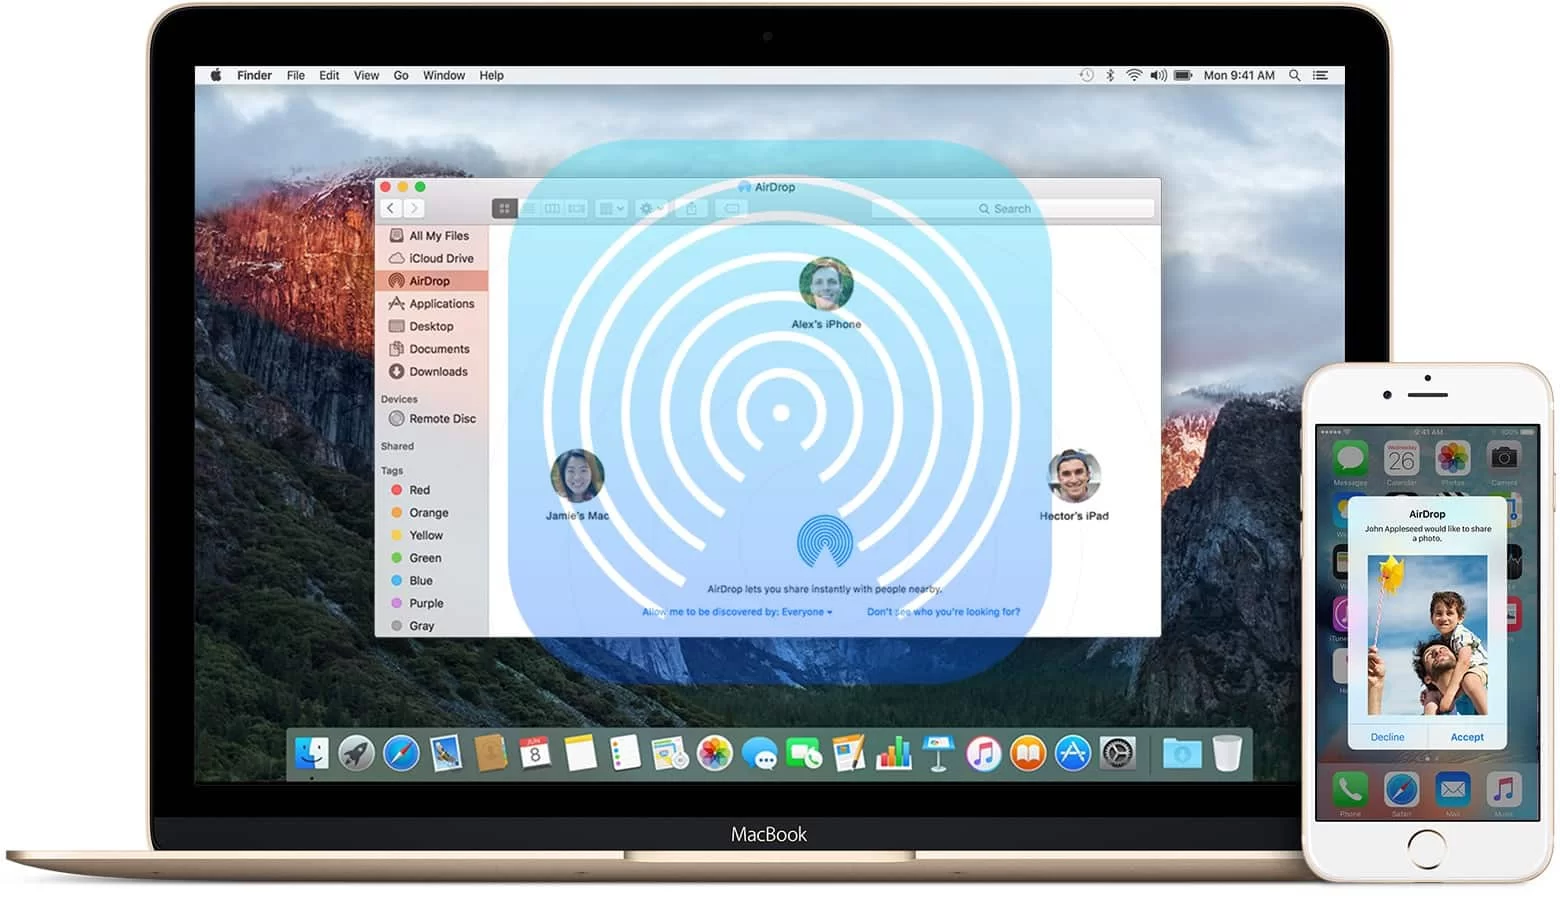 Transferring from iPhone to Mac using AirDrop